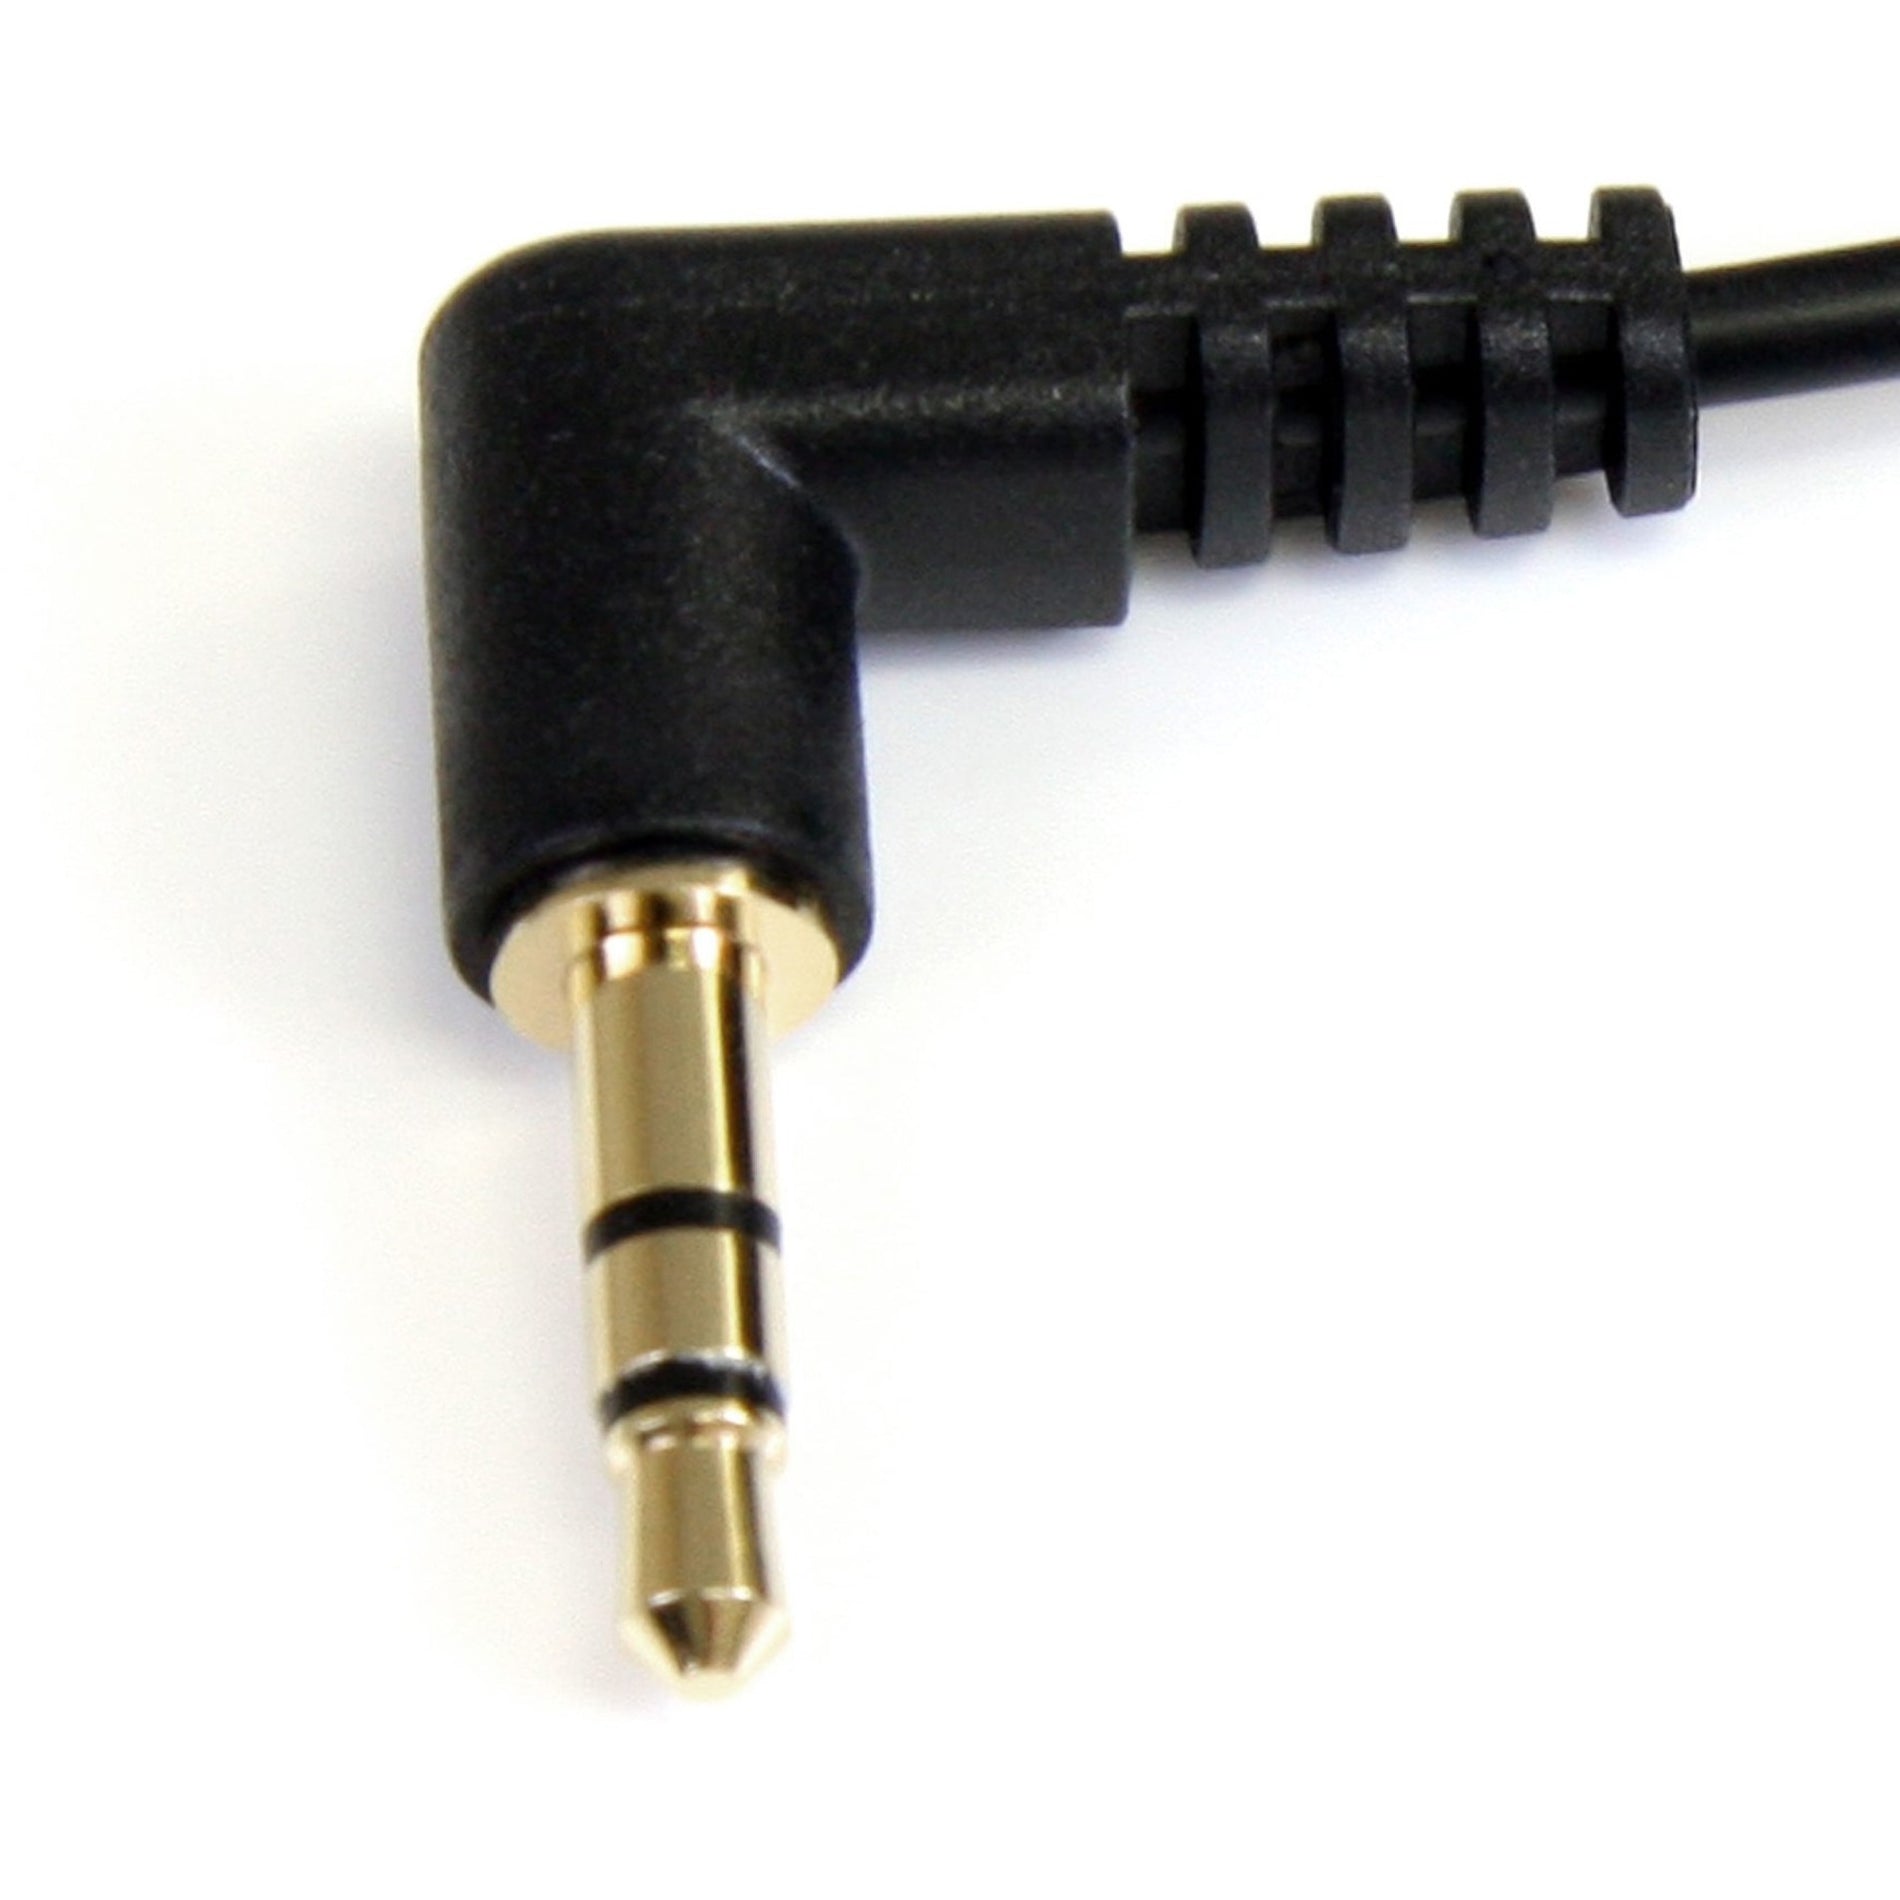 StarTech.com MU1MMS2RA 1 ft Slim 3.5mm Right Angle Stereo Audio Cable - M/M, Gold Plated, Strain Relief